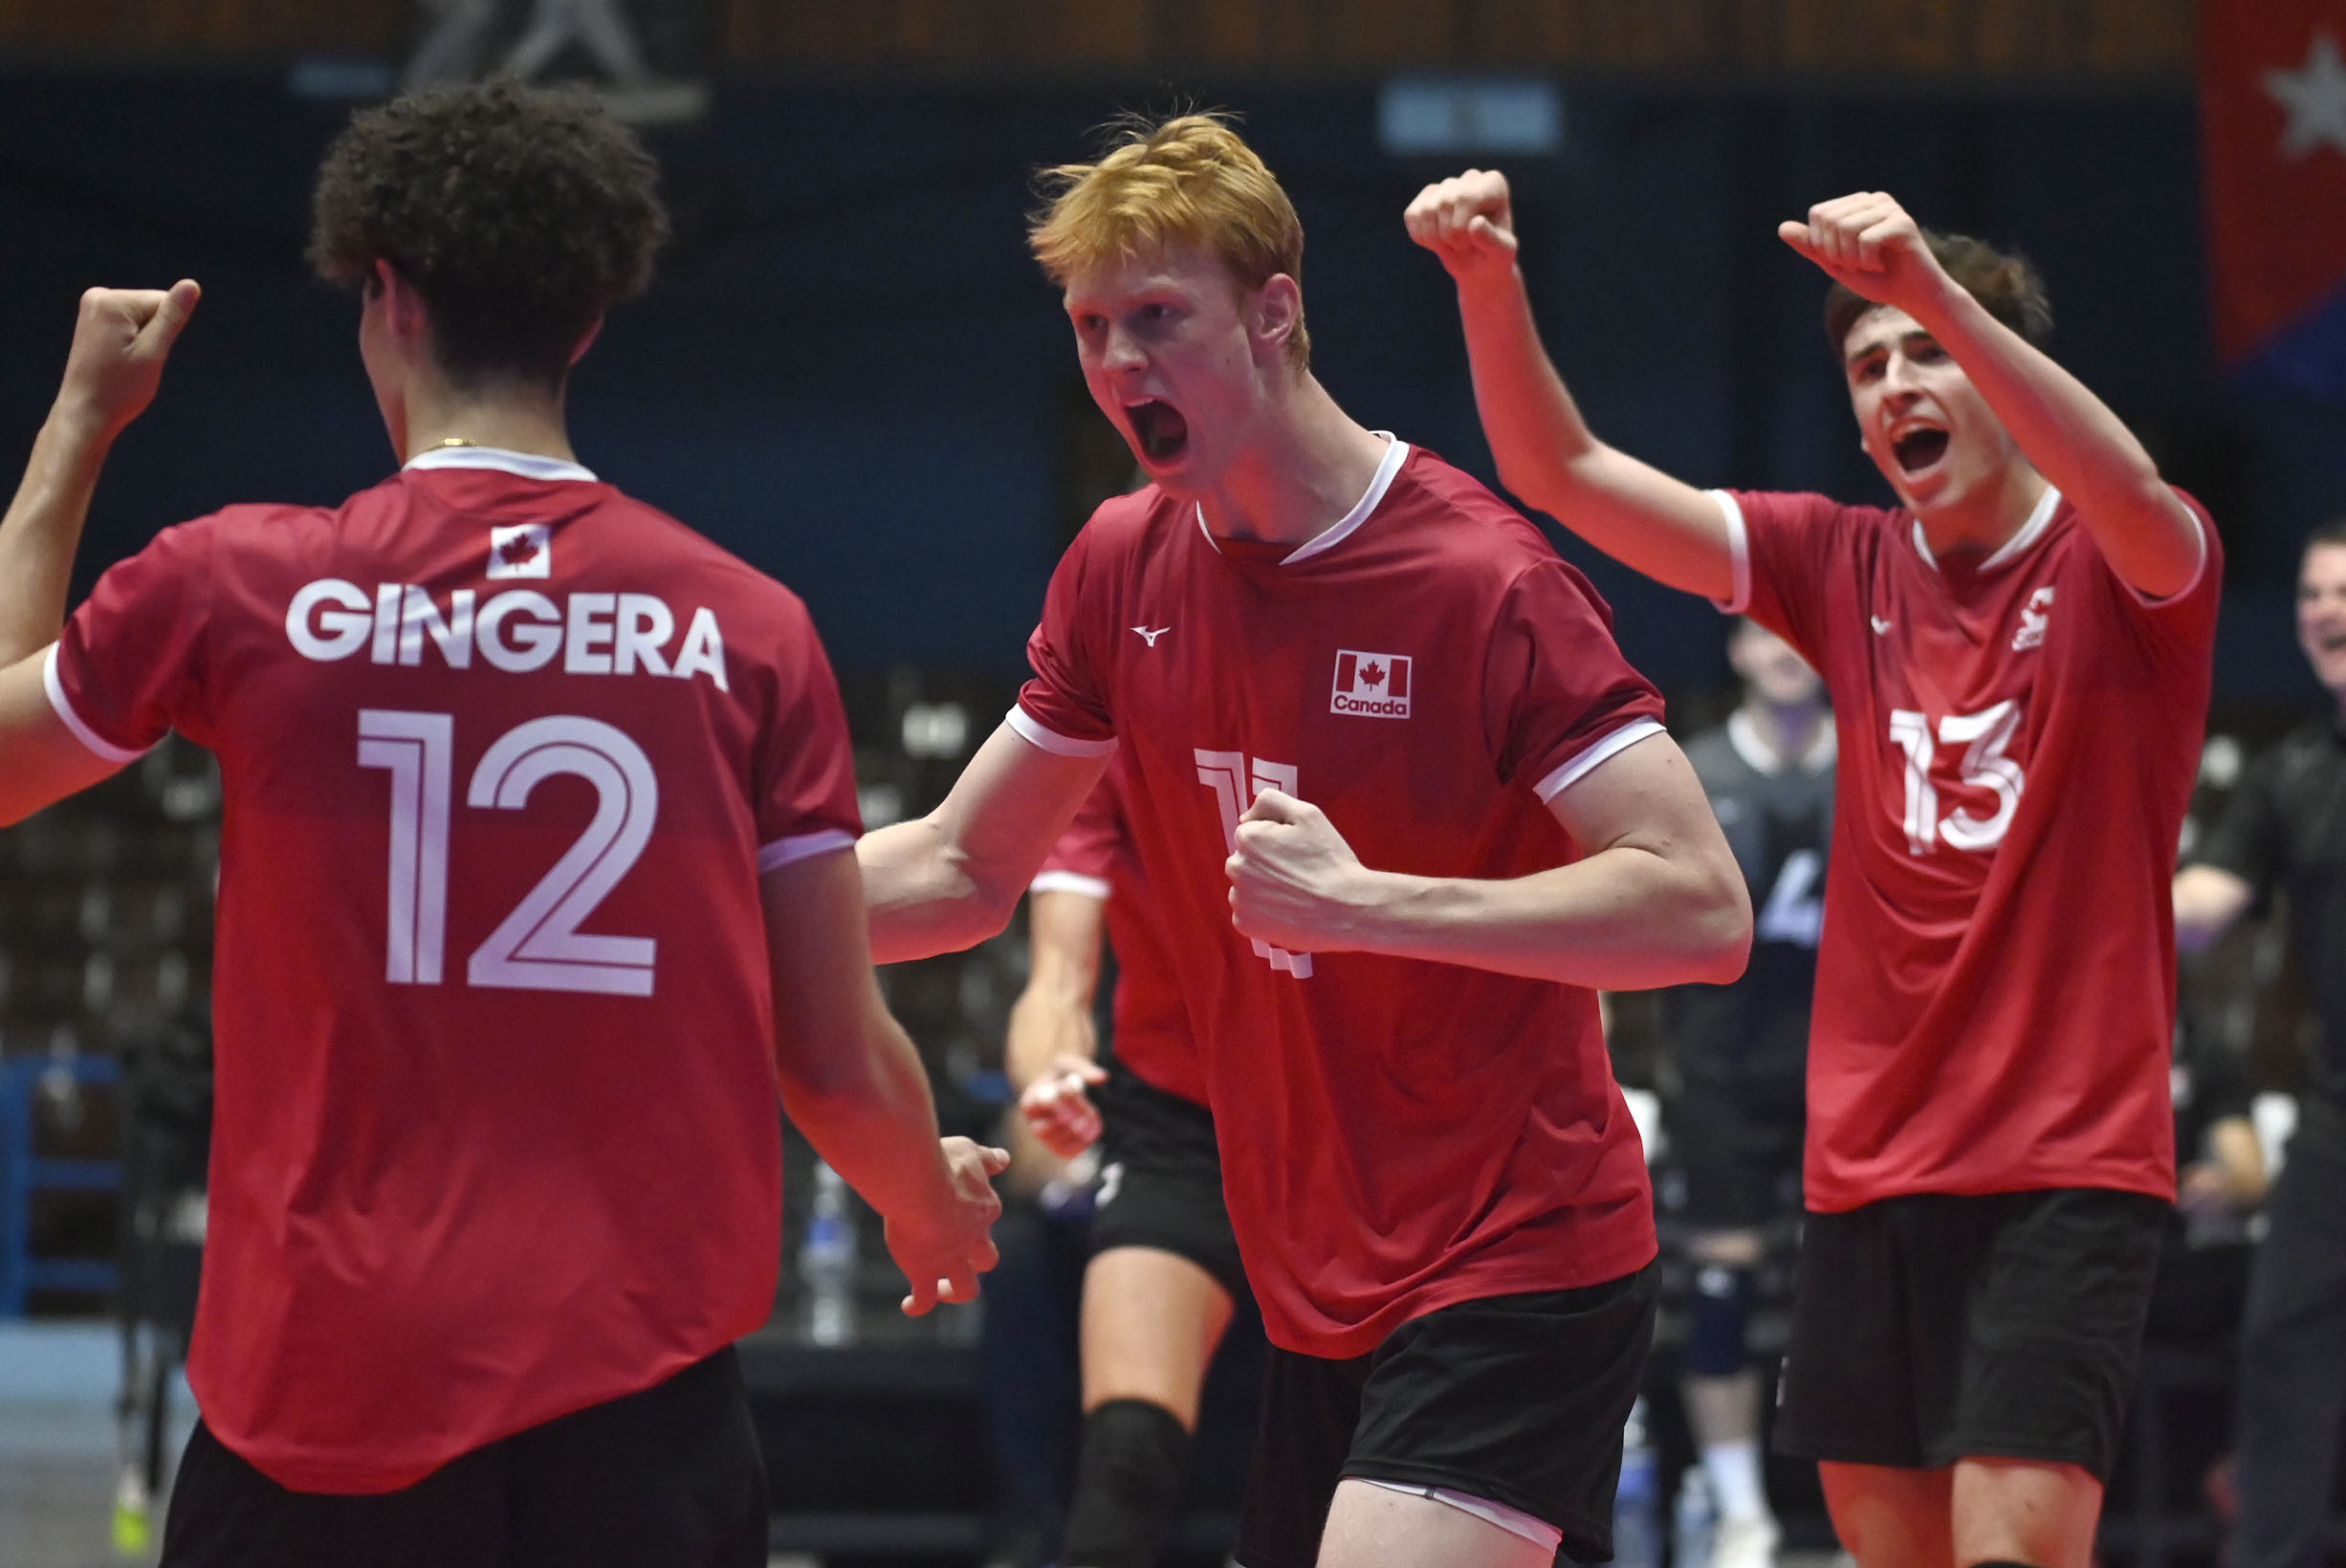 Canada beat Cuba to advance undefeated to U21 Pan Am Cup semifinals